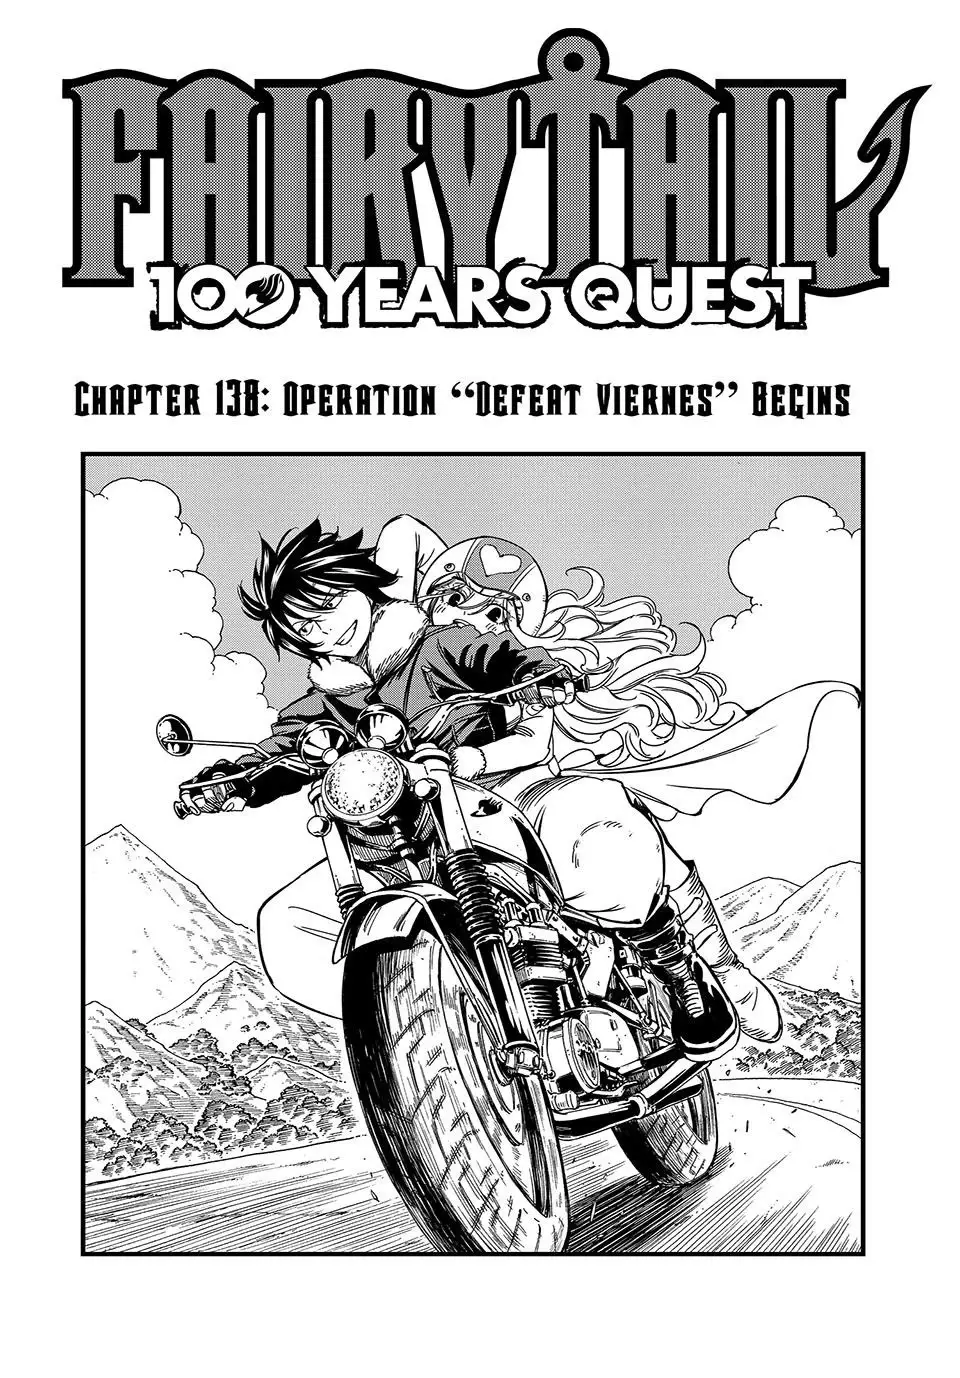 Fairy Tail: 100 Years Quest - 138 page 1-ca4016b7